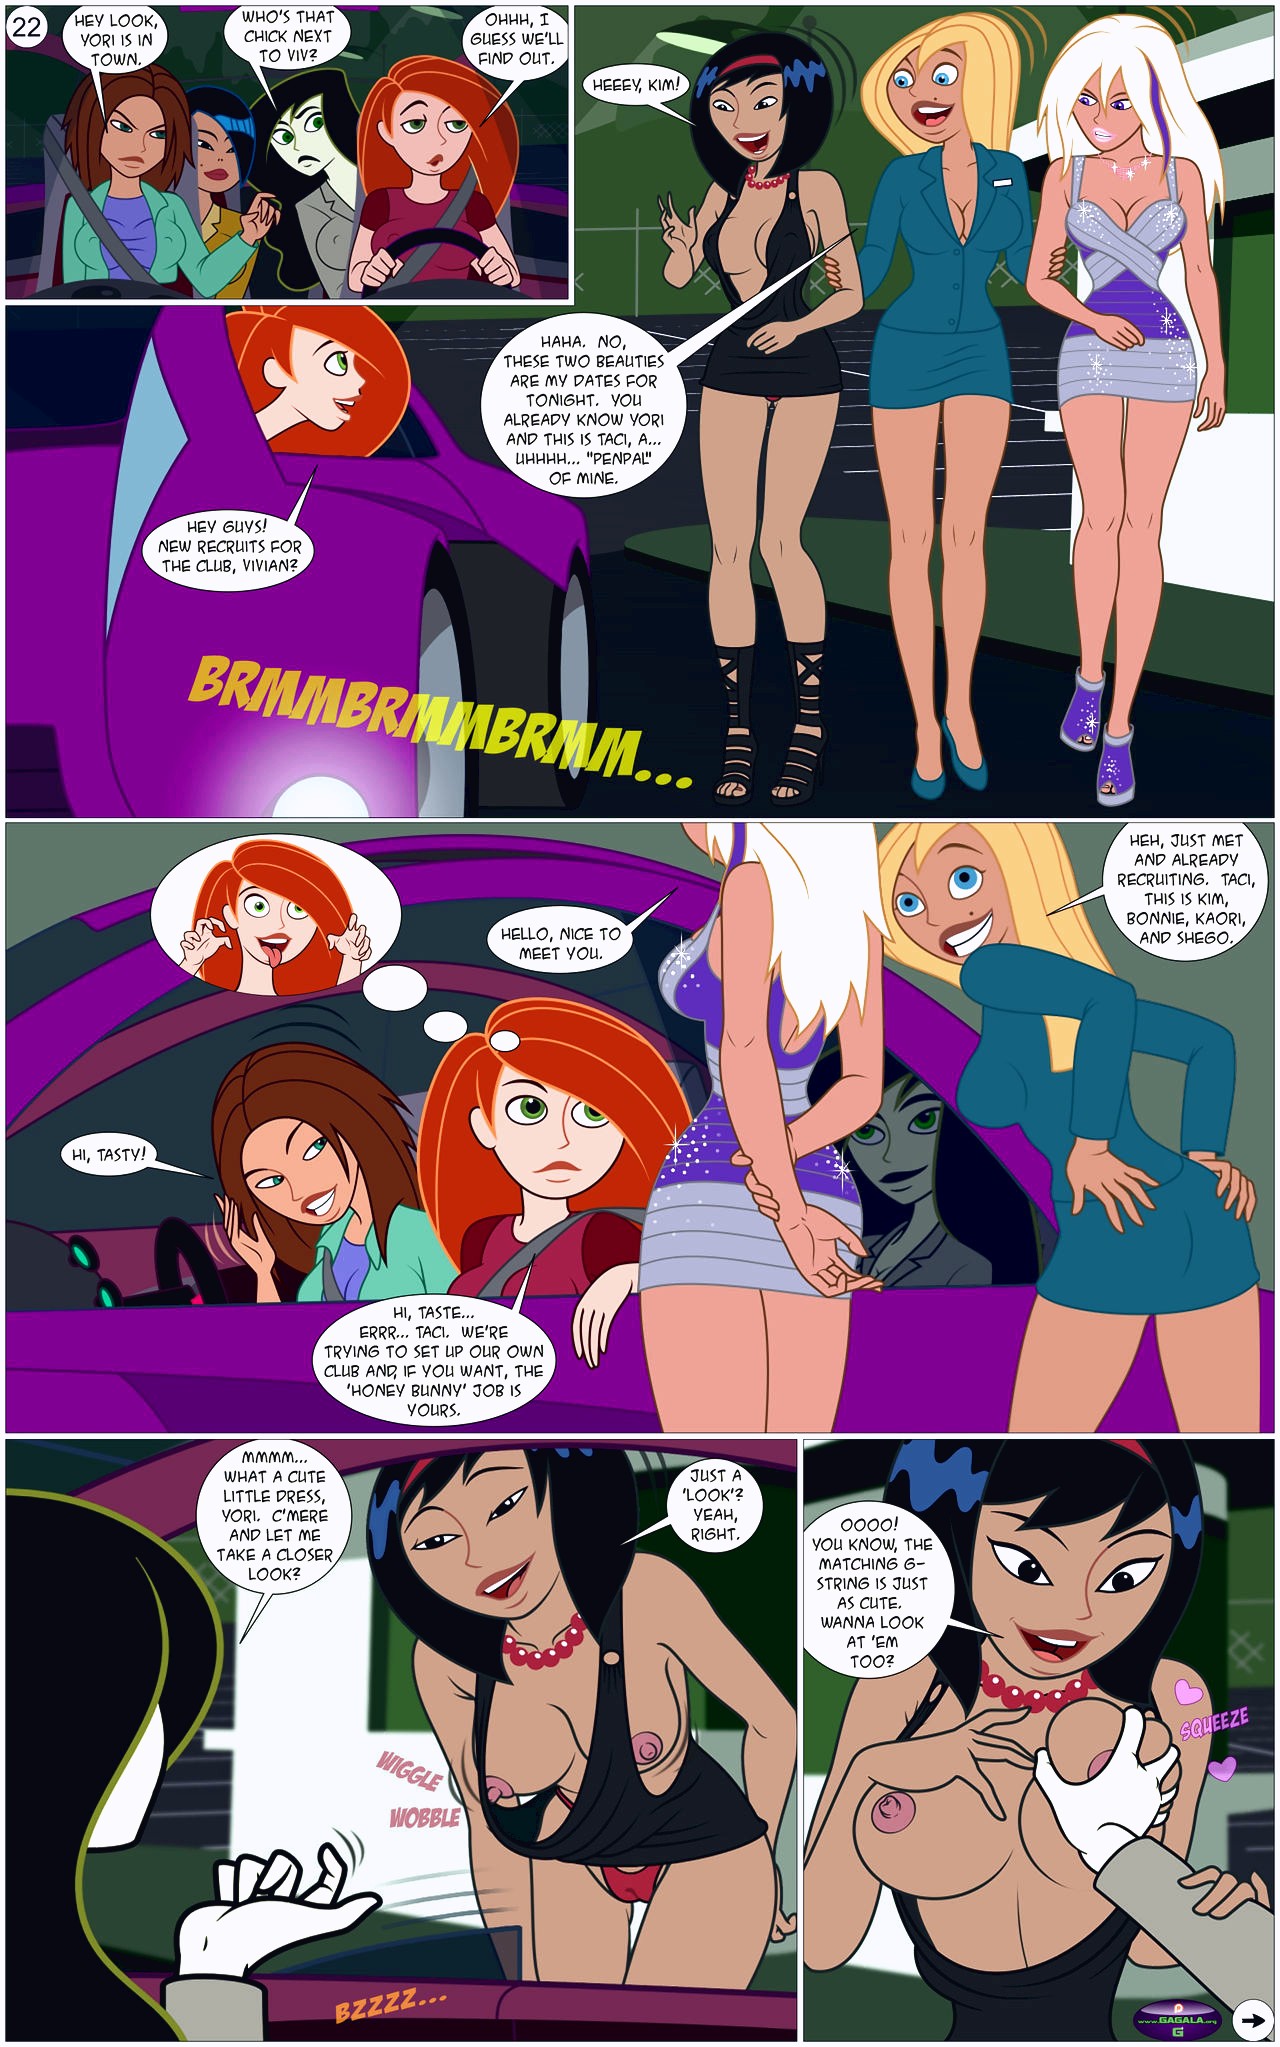 The Tale of Kiki Possible porn comic page 022